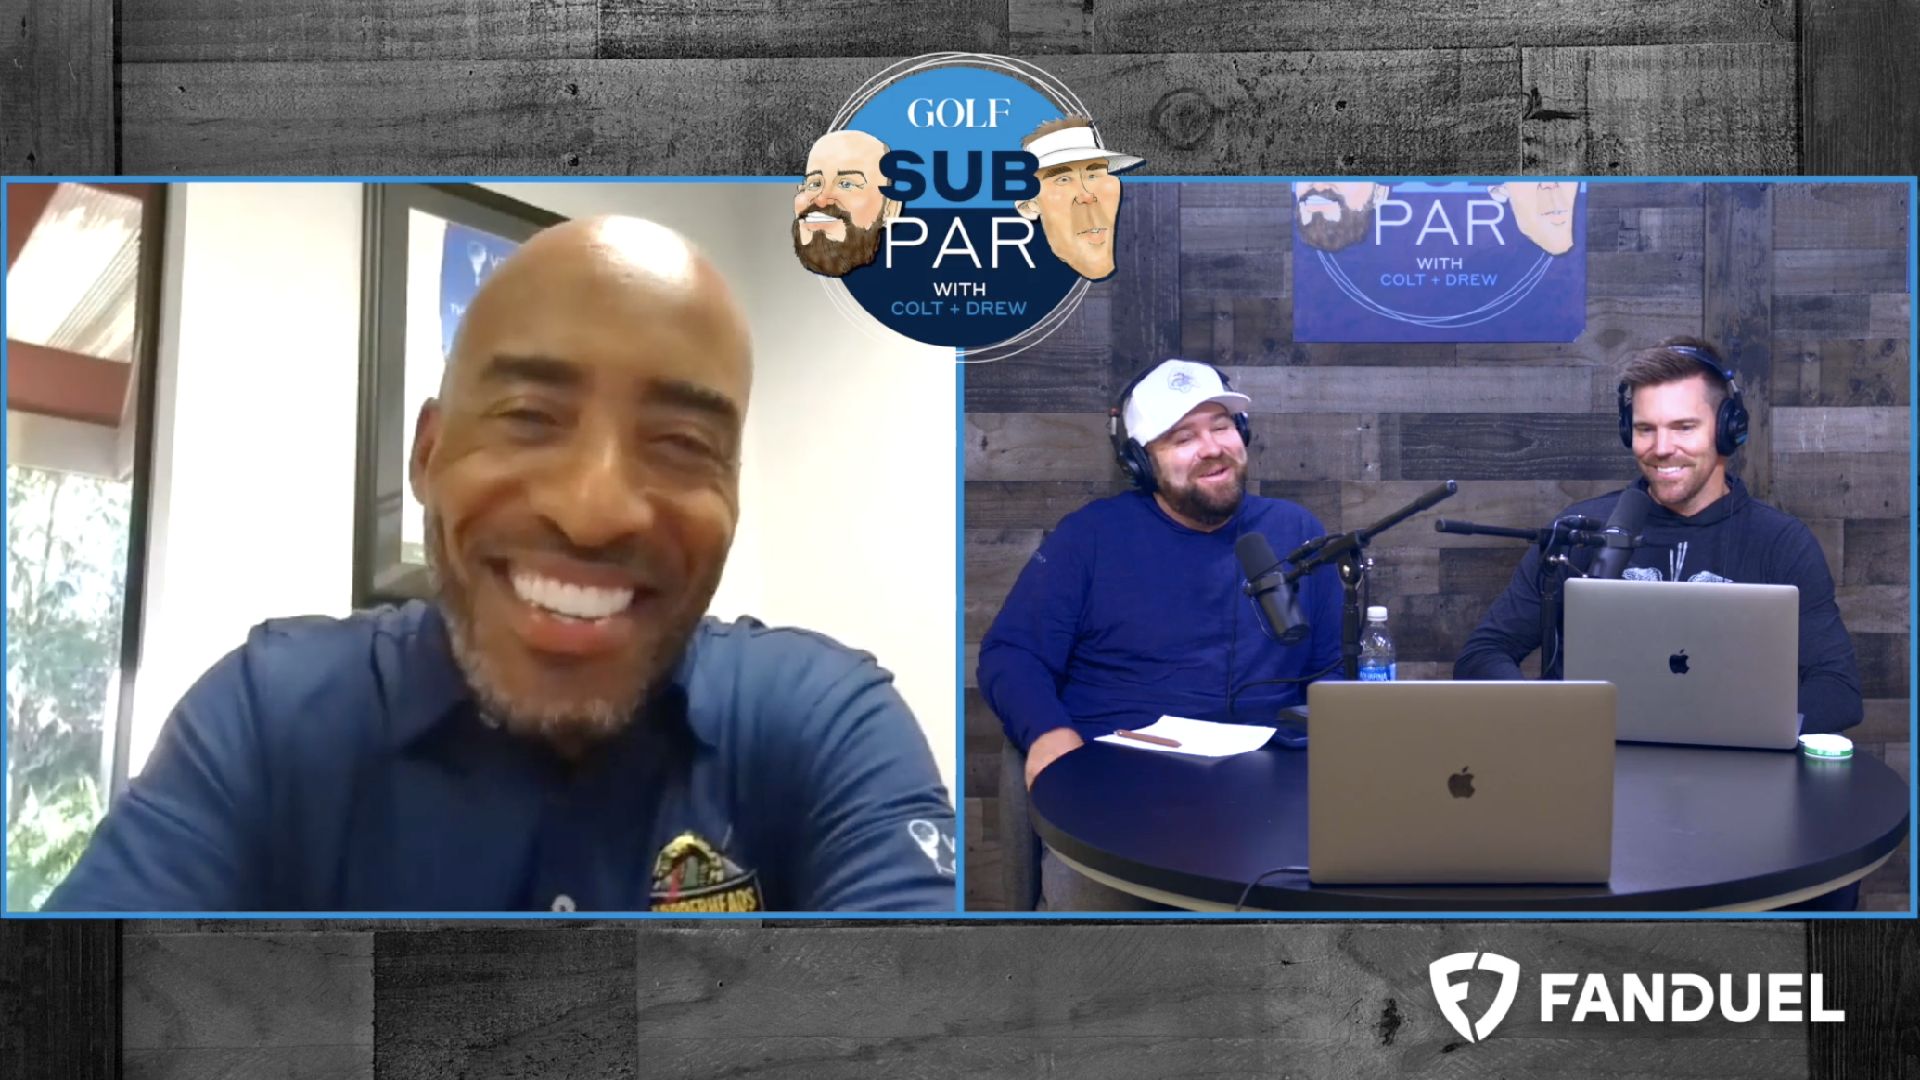 GOLF's Subpar: Ronde Barber on playing Augusta National